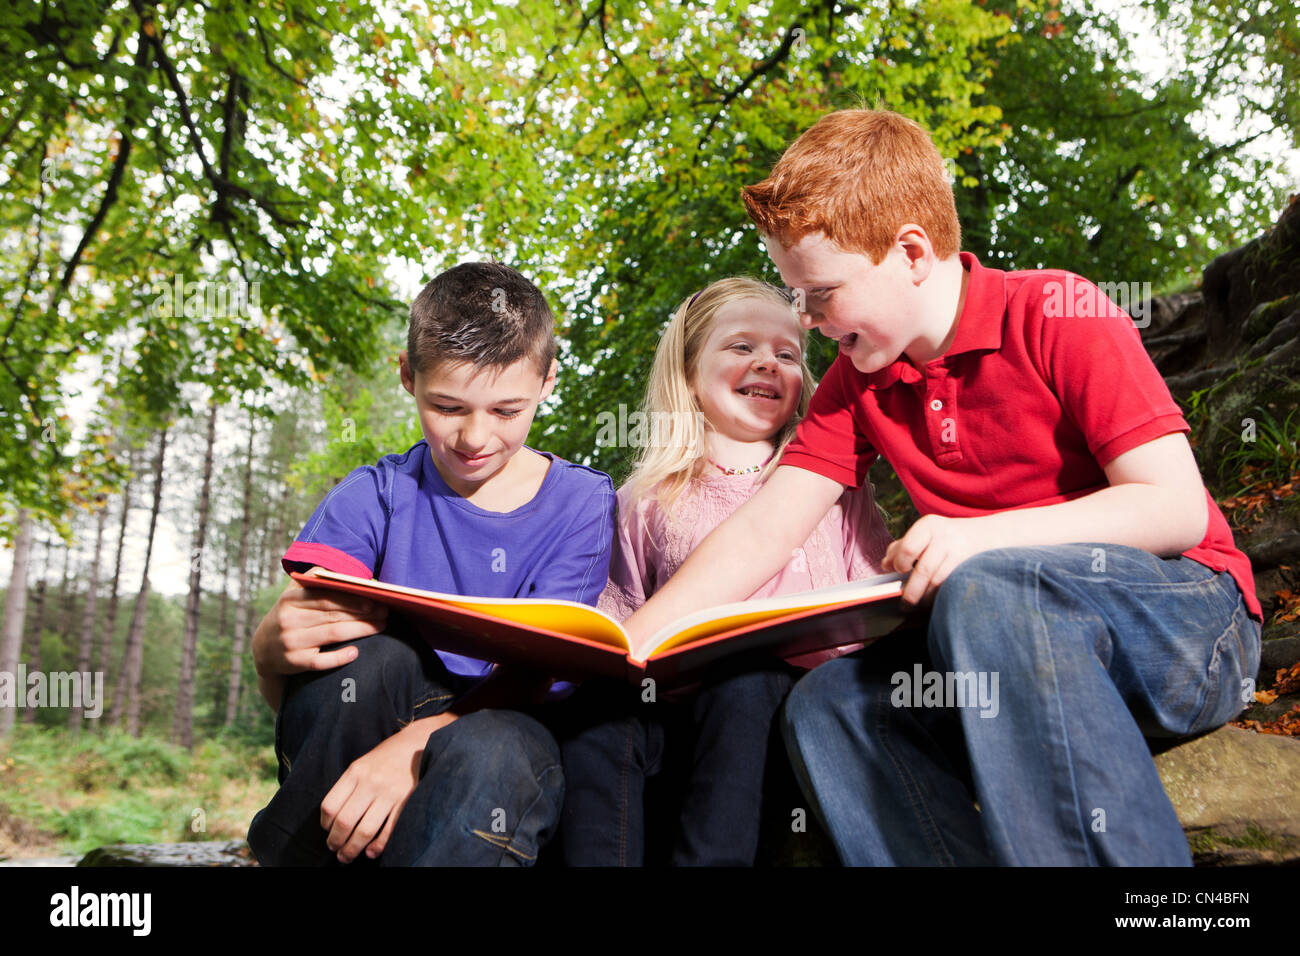 Three children looking at a book together Stock Photo